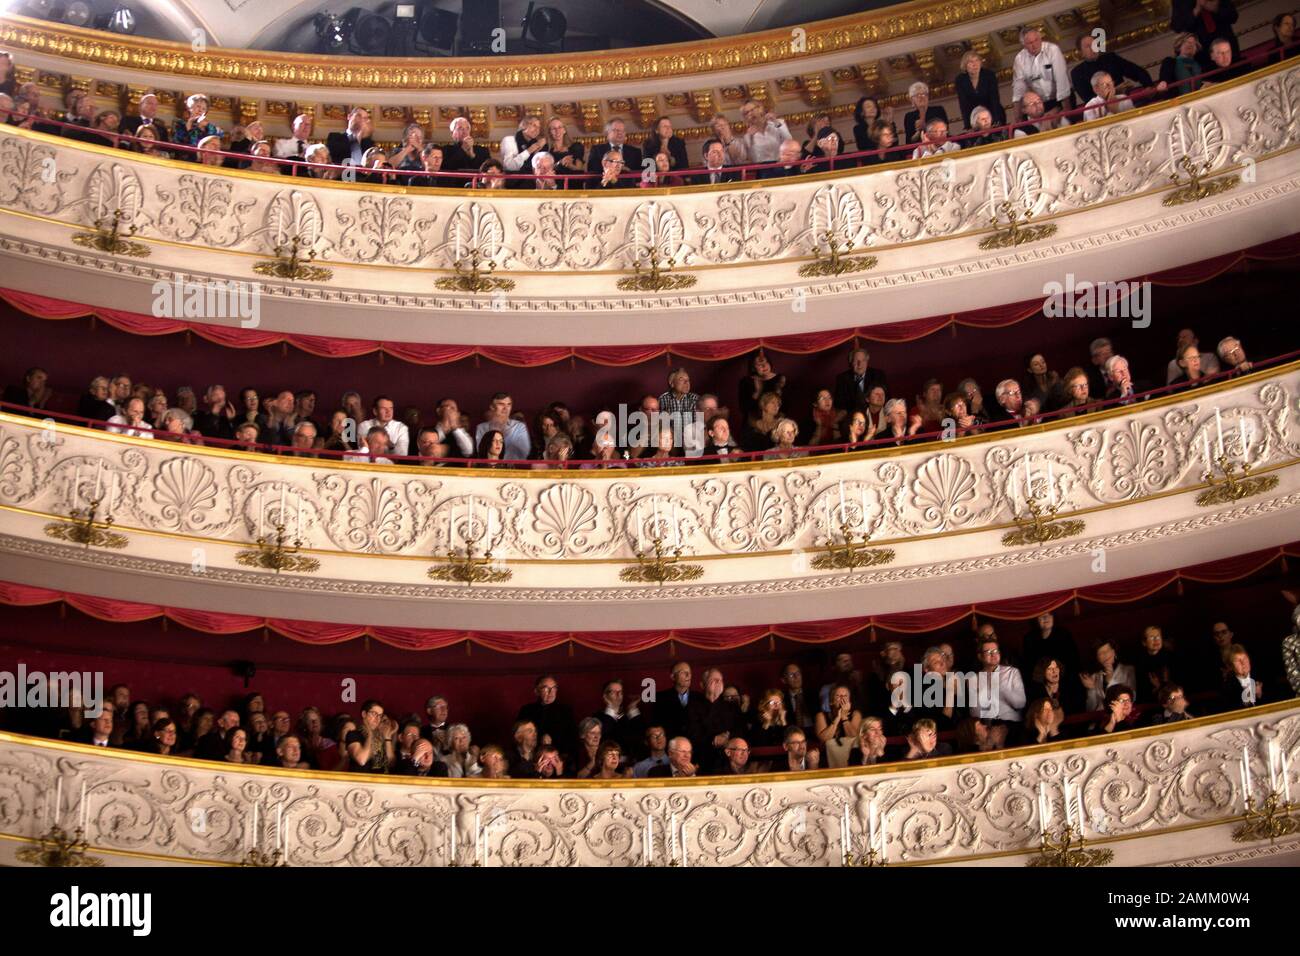 Opera Premiere High Resolution Stock Photography and Images - Alamy